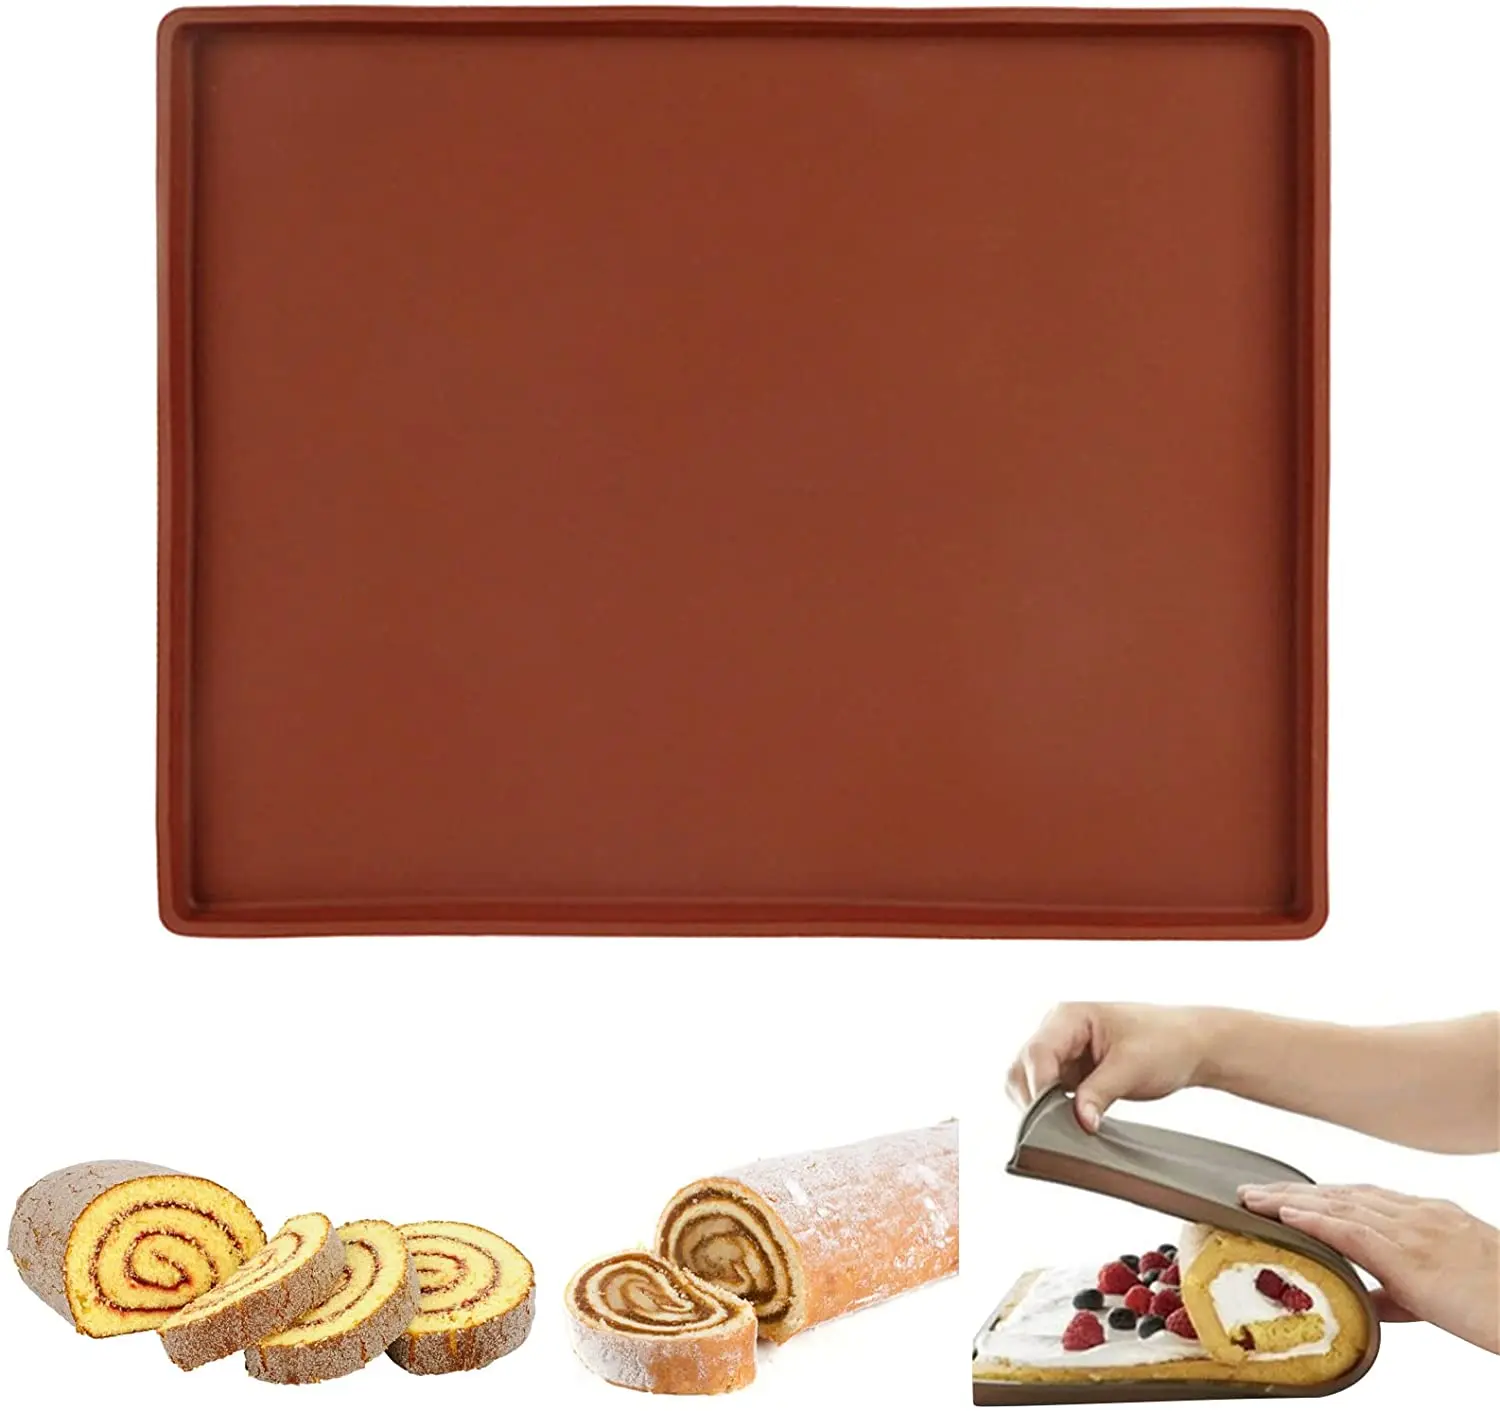 Swiss roll cake mat - flexible multipurpose silicone sheet Non stick jelly roll pan baking tray pastry mat pizza cookies mould